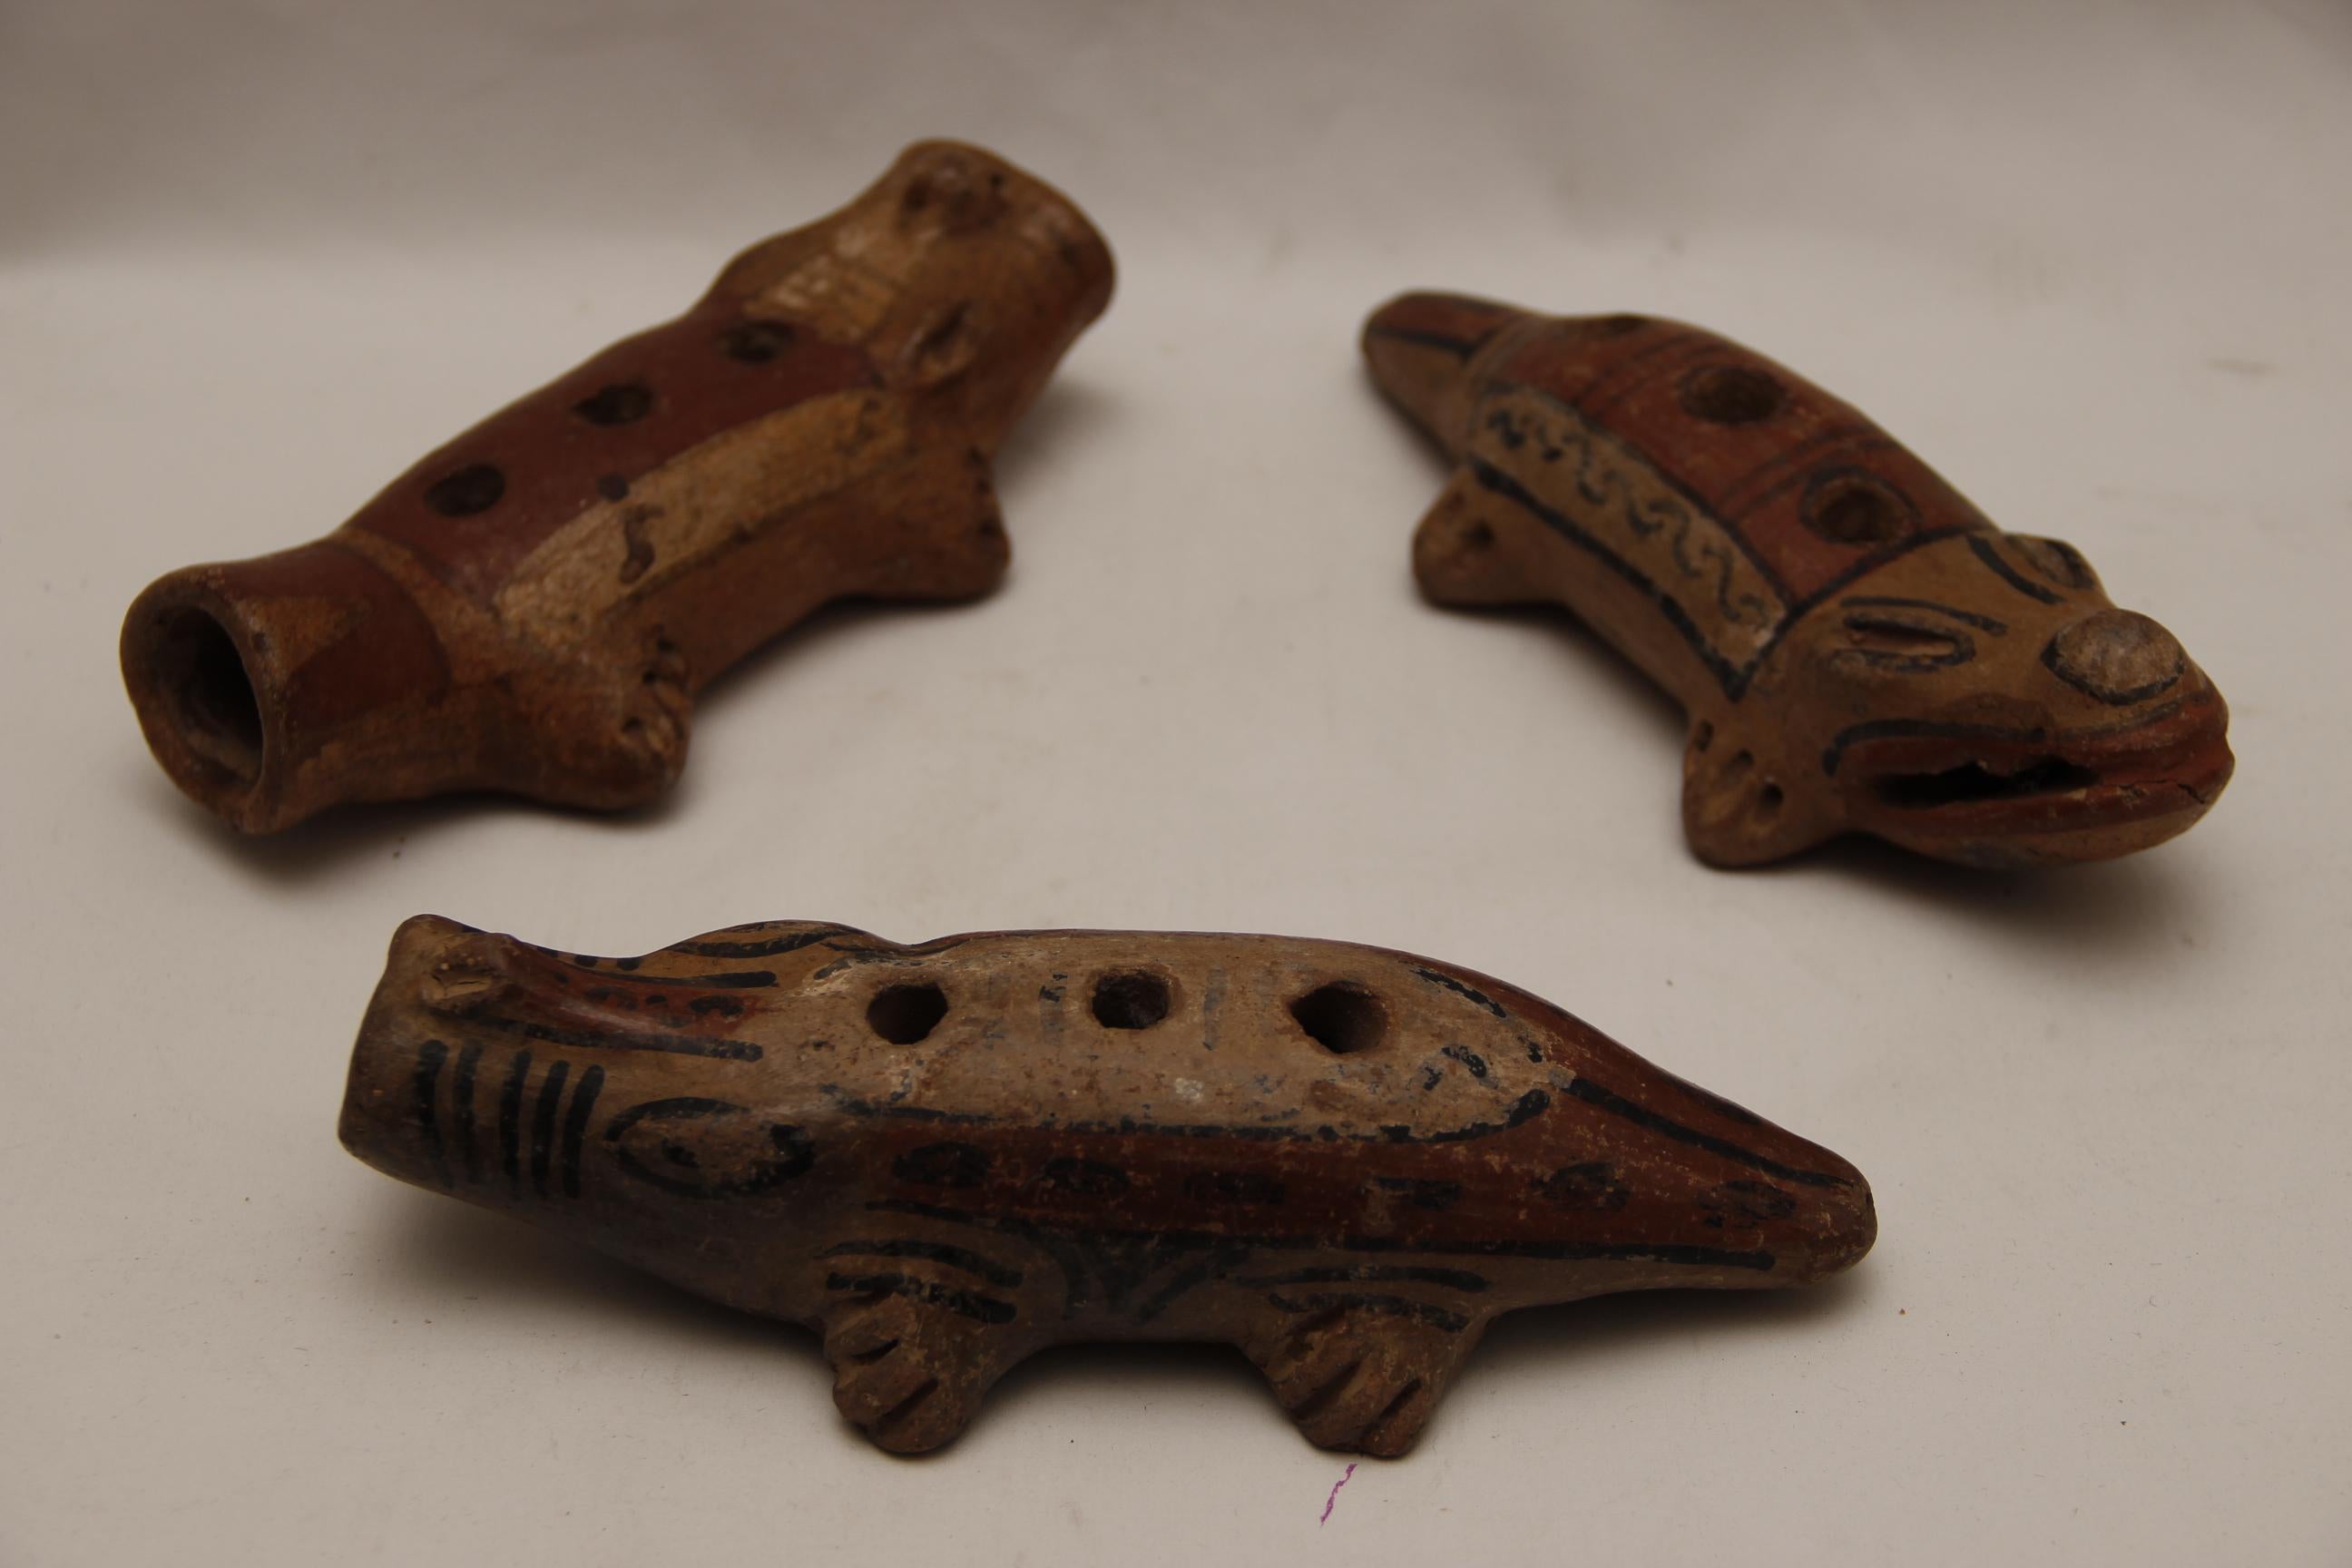 This grouping of alligator-like or crocodile effigy antique pipes is both beautiful and intriguing. The wear on the backs and underside of the polychromed pottery suggests handling and use over the decades. The top parts of the instruments are